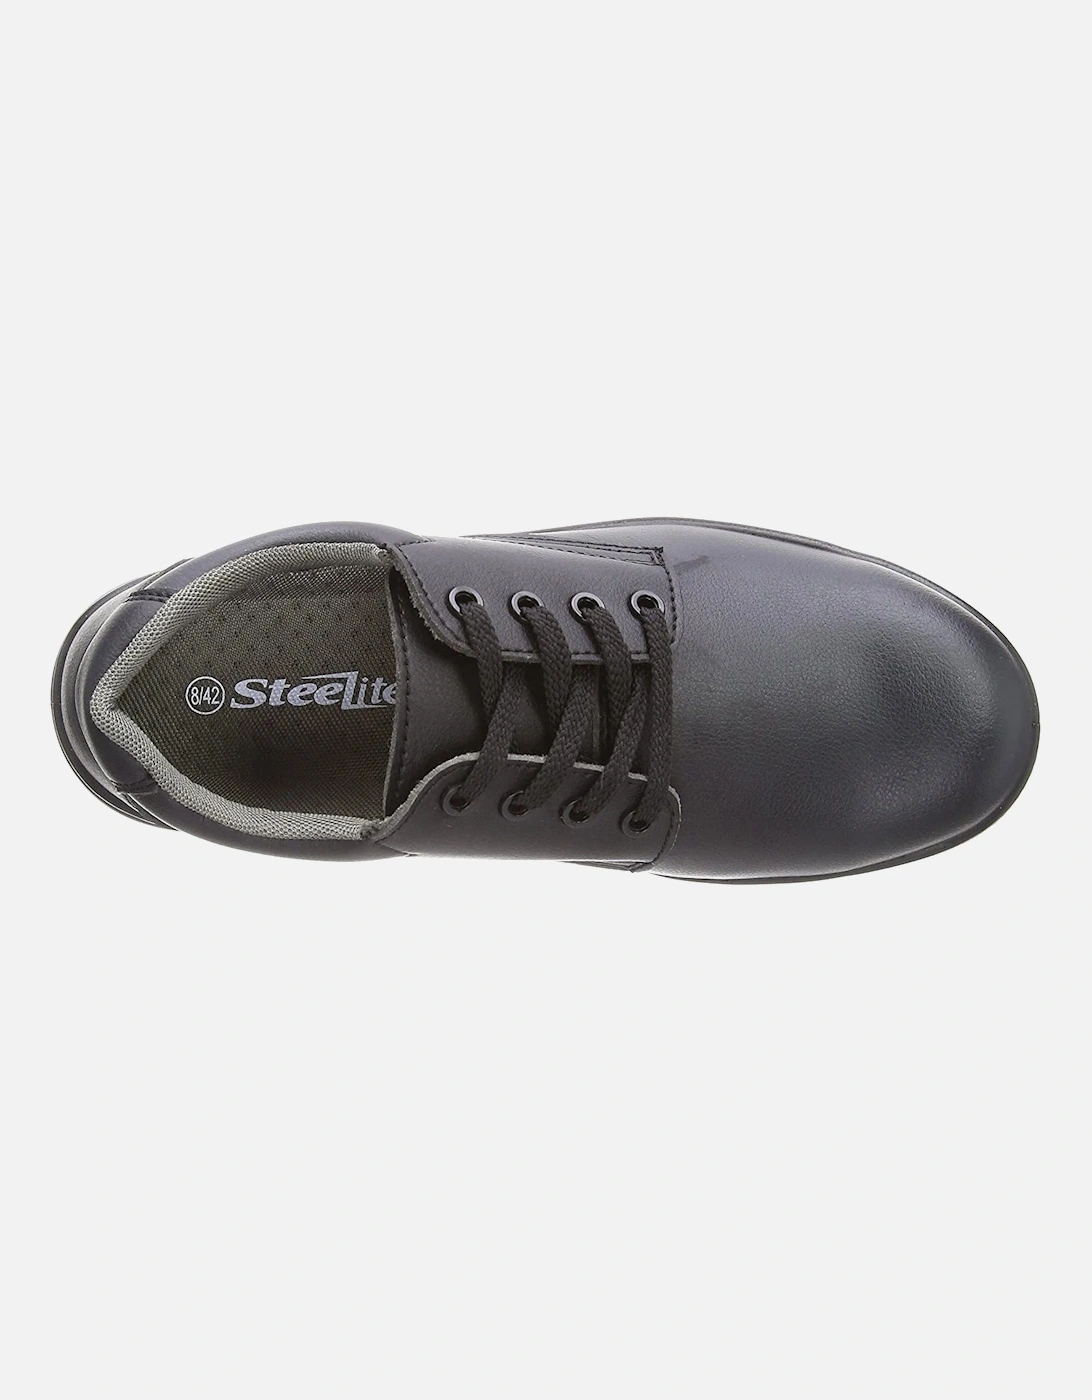 Unisex Steelite Laced Safety Shoes S2 (FW80) / Workwear